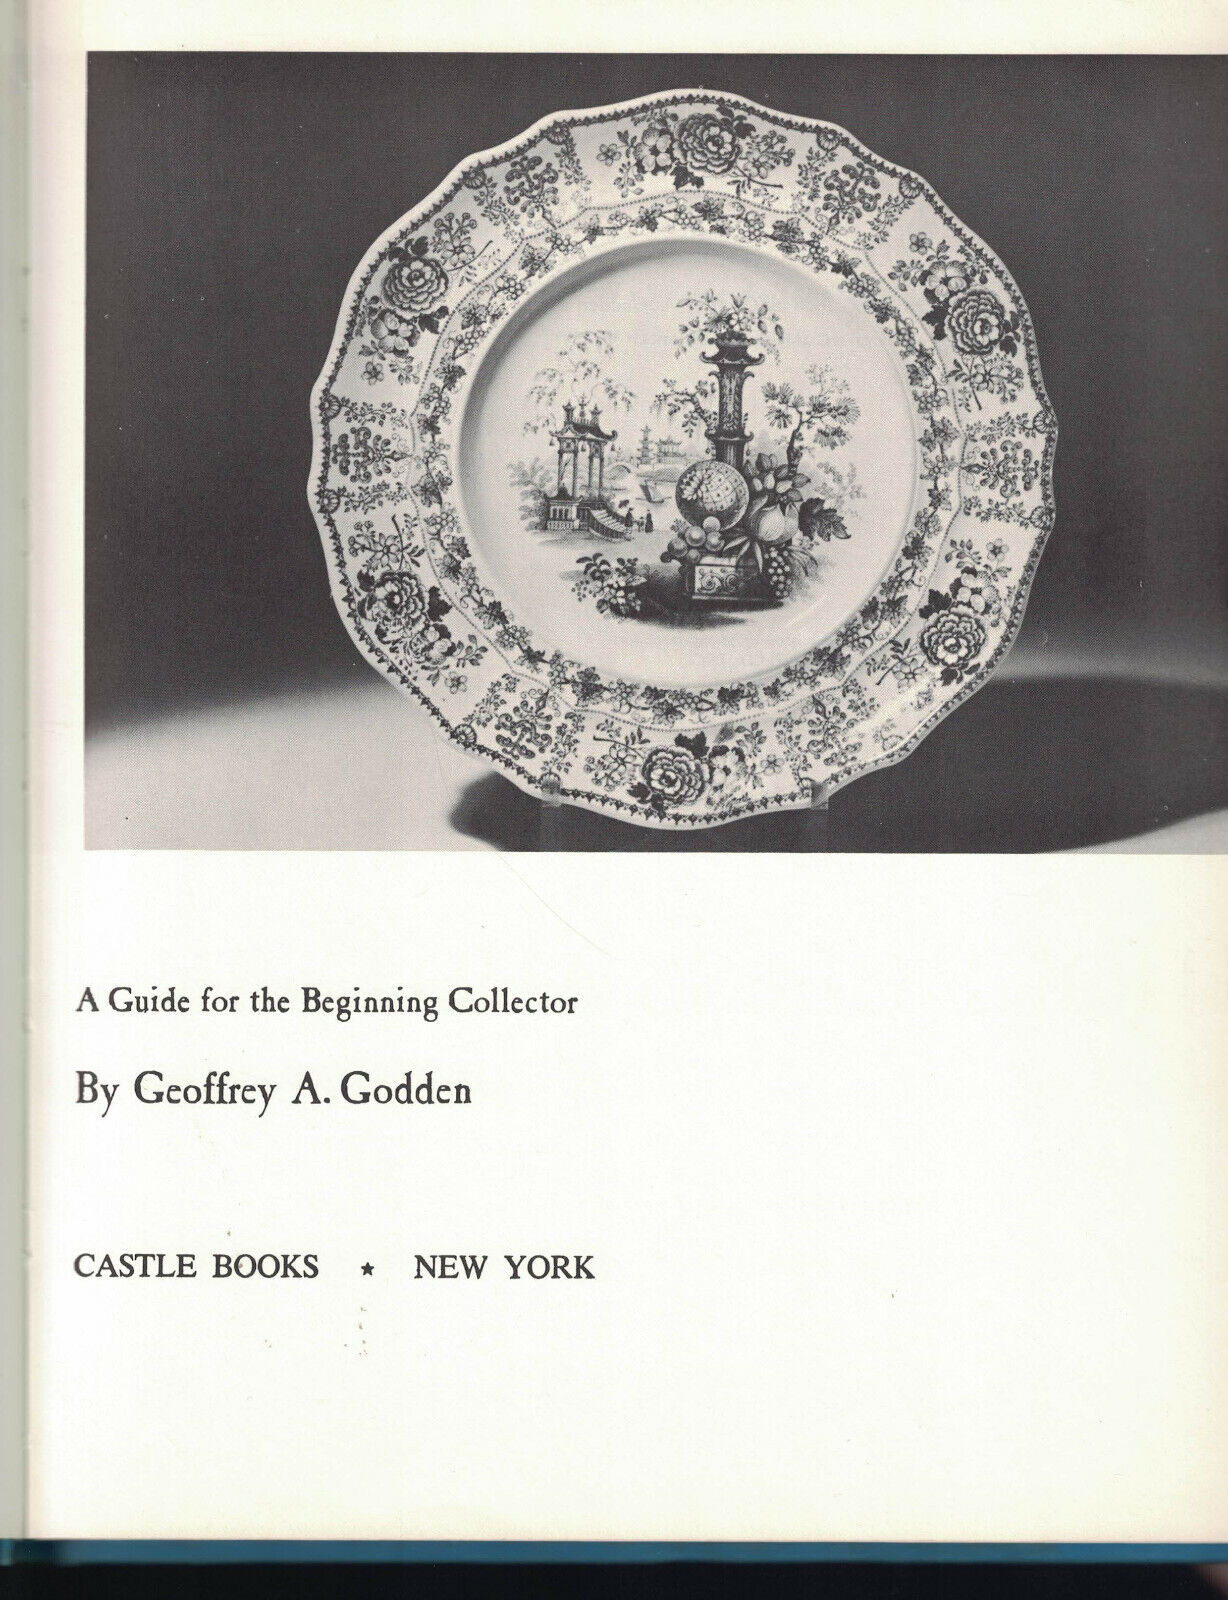 Antique Glass and China-A guide for the Beginning Collector by Godden hb/dj